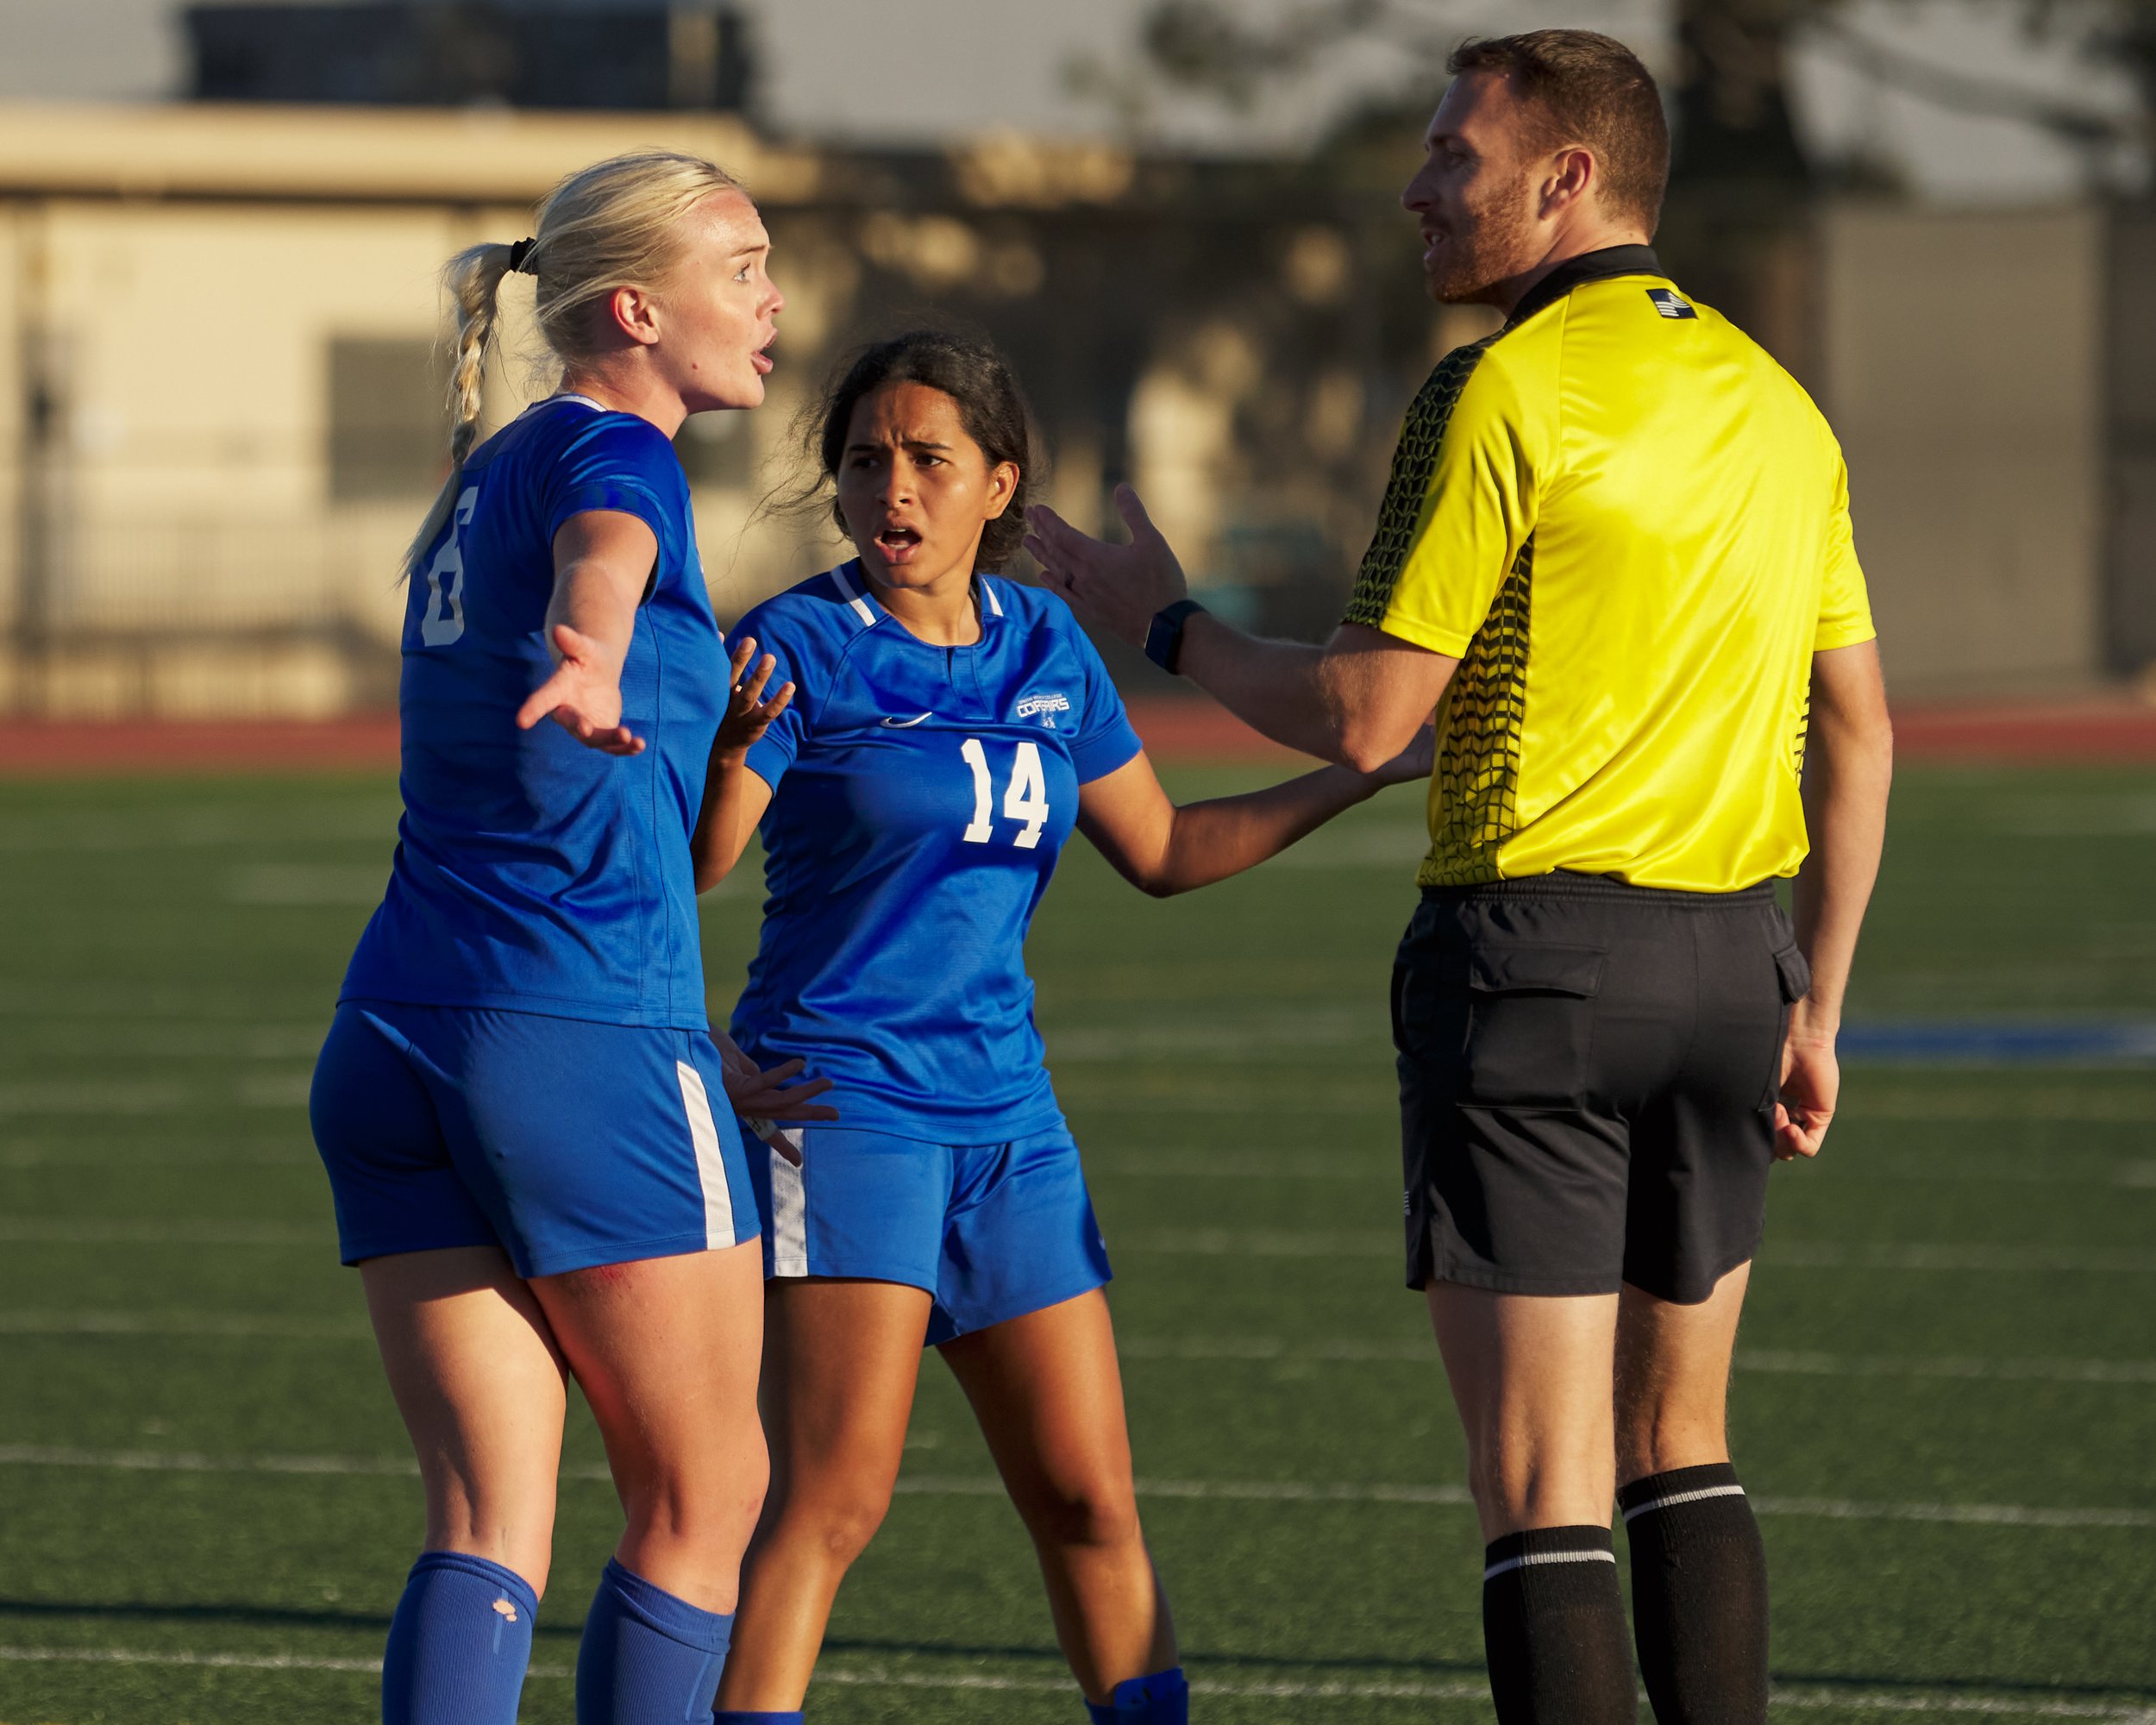  Santa Monica College Corsairs' Mathilda Isaksson and Vashti Zuniga complain about the referee's determination that the Corsairs did not score a goal, despite getting the ball past the goalie, during the women's soccer match against the College of th